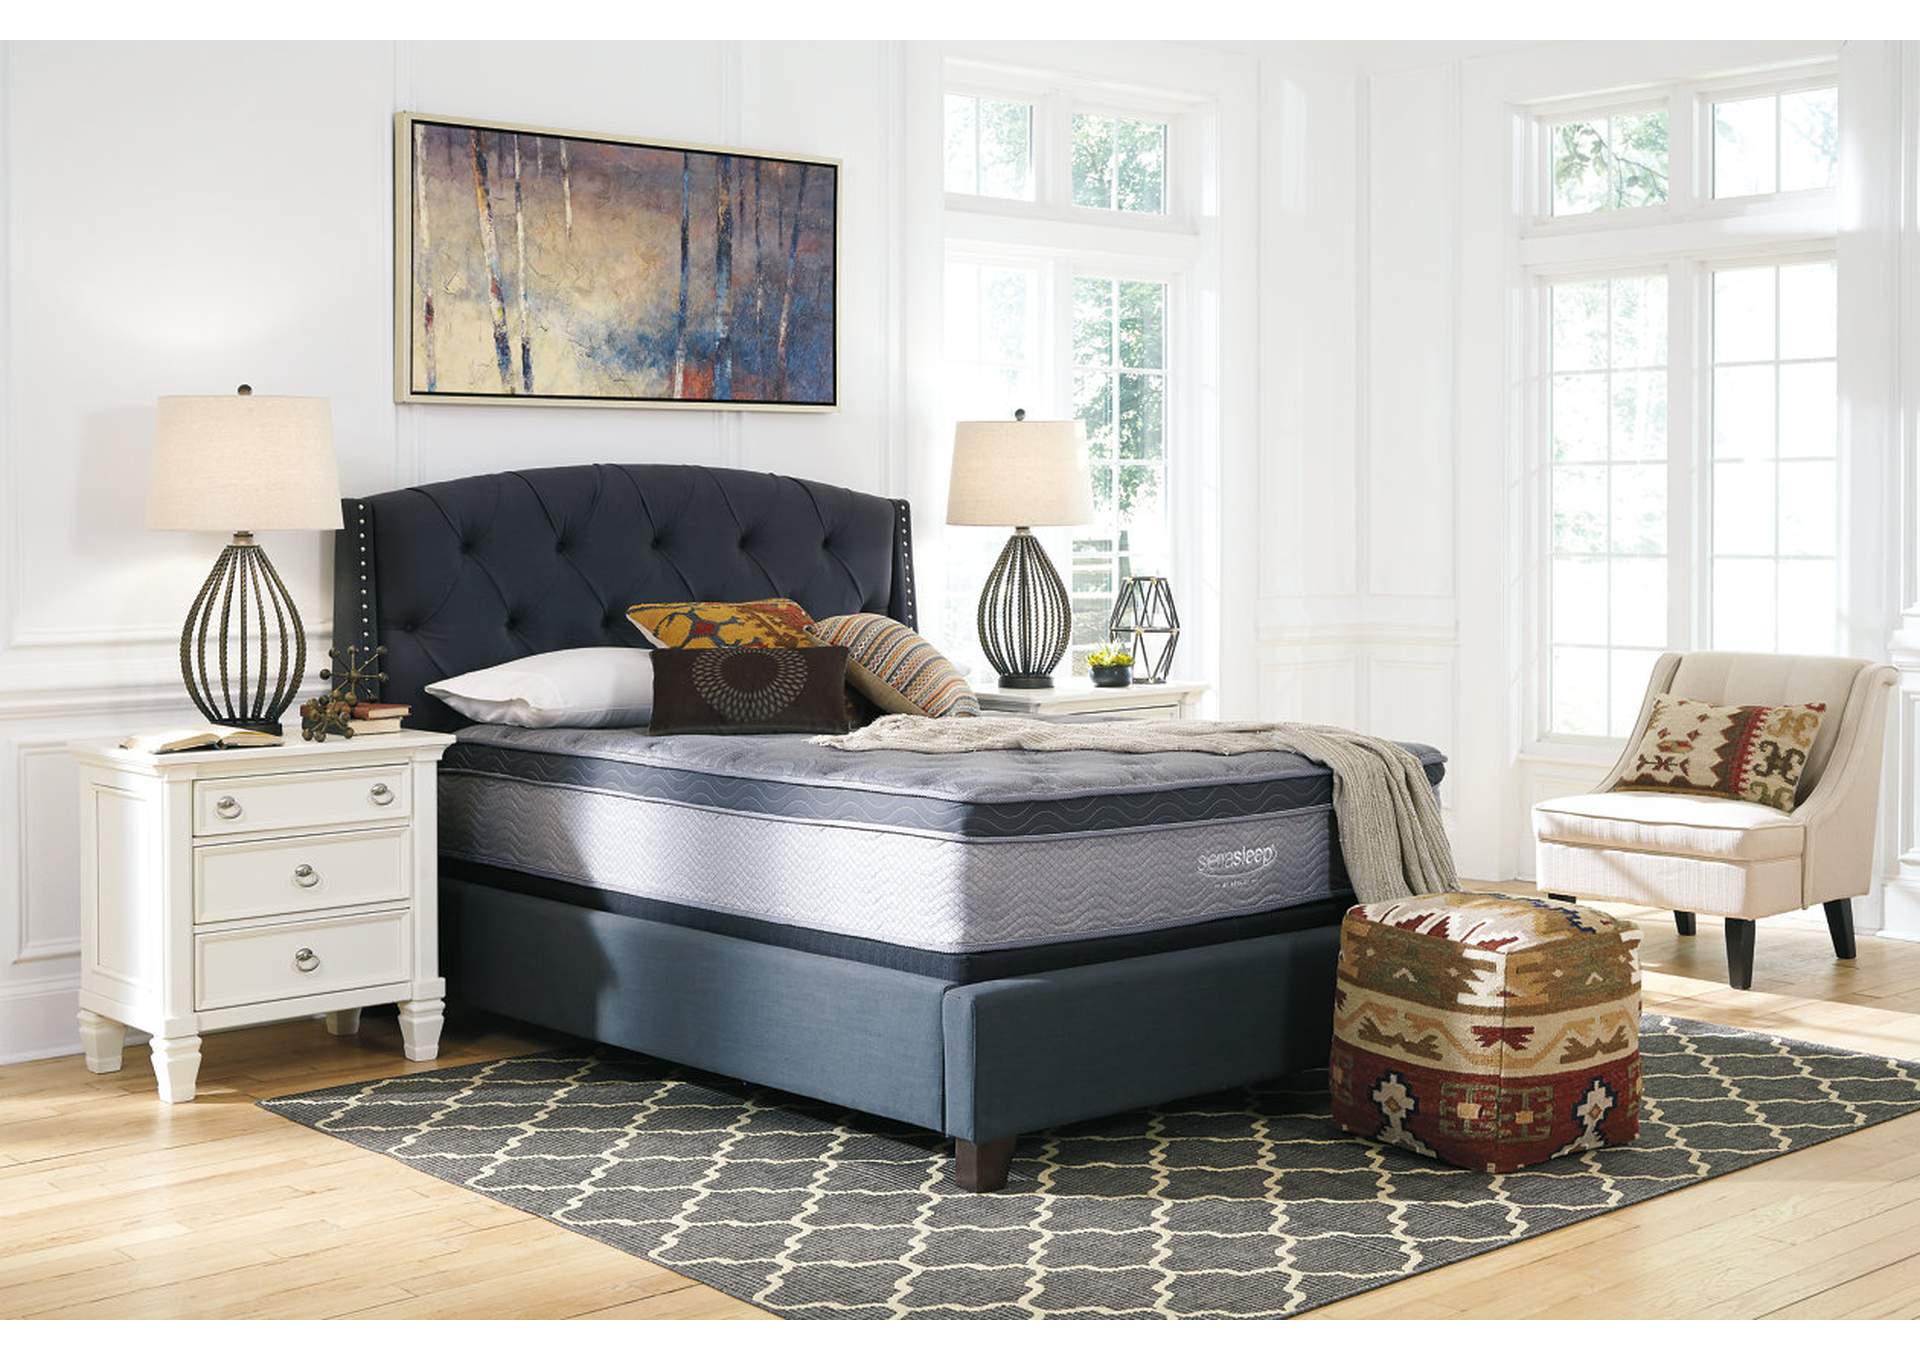 Augusta Queen Mattress Ashley Furniture Homestore Independently Owned and Operated by Hamad M